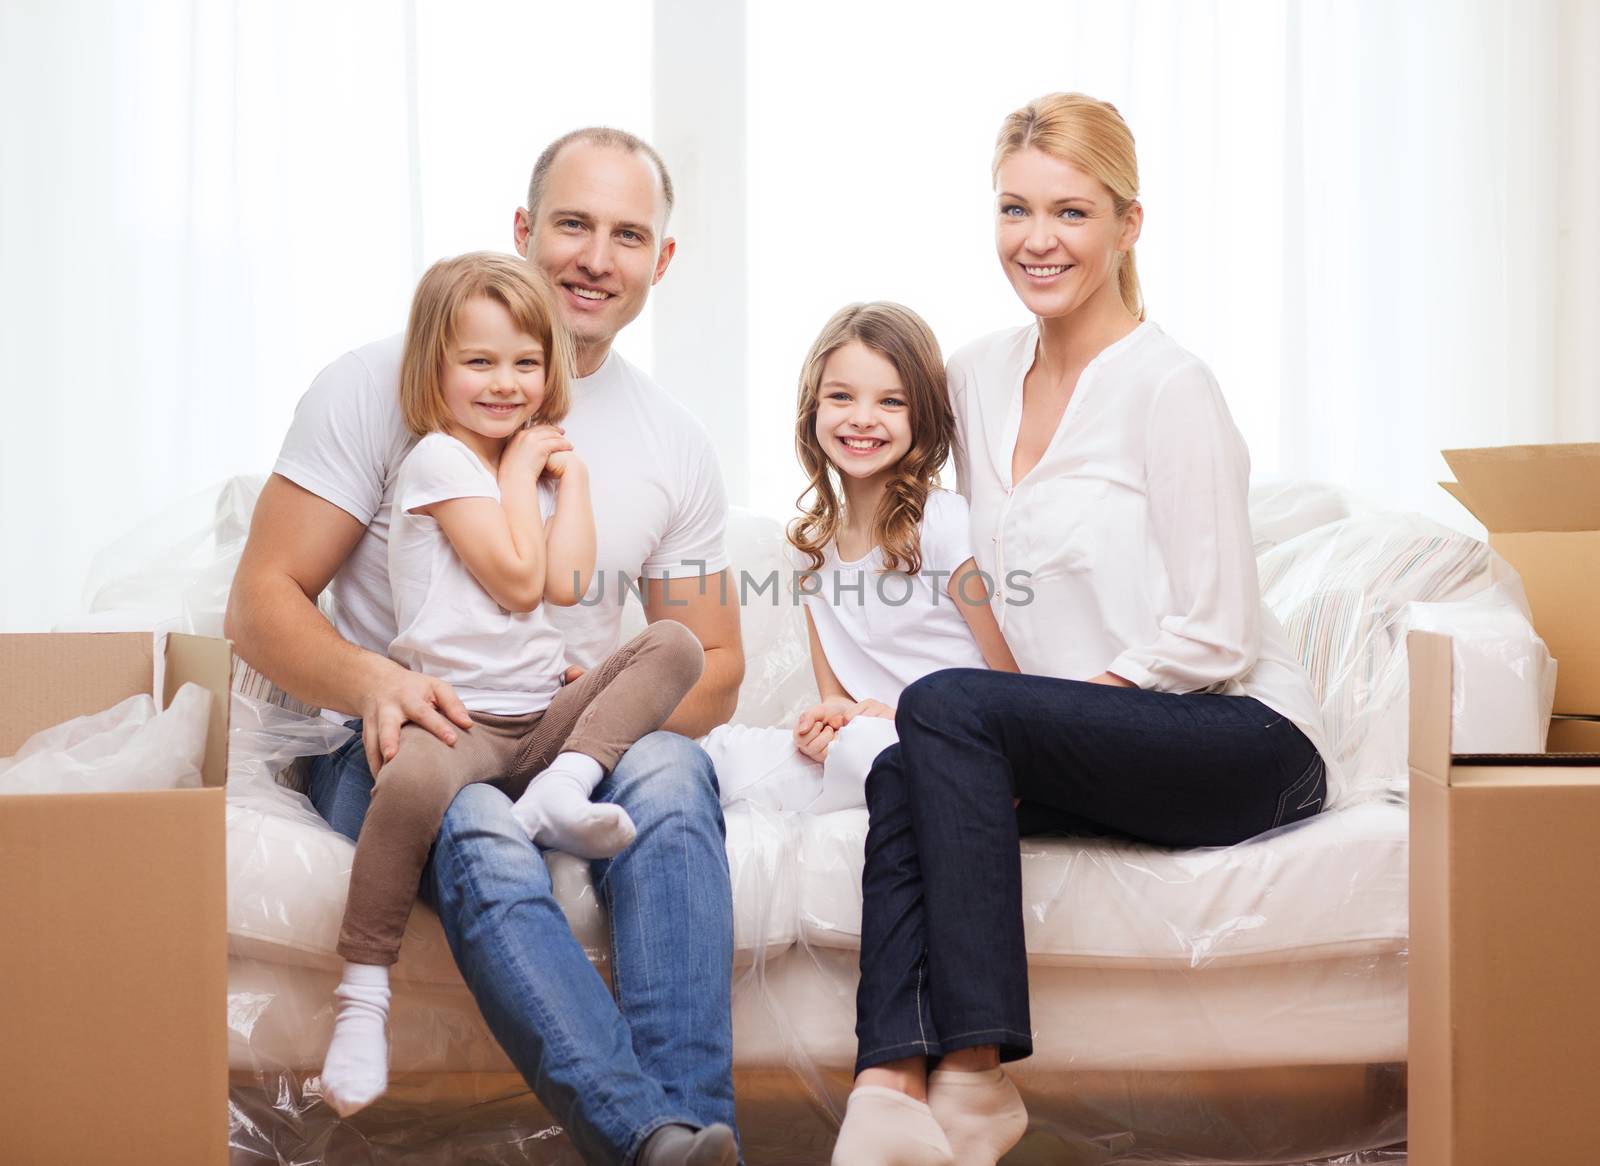 smiling parents and two little girls at new home by dolgachov